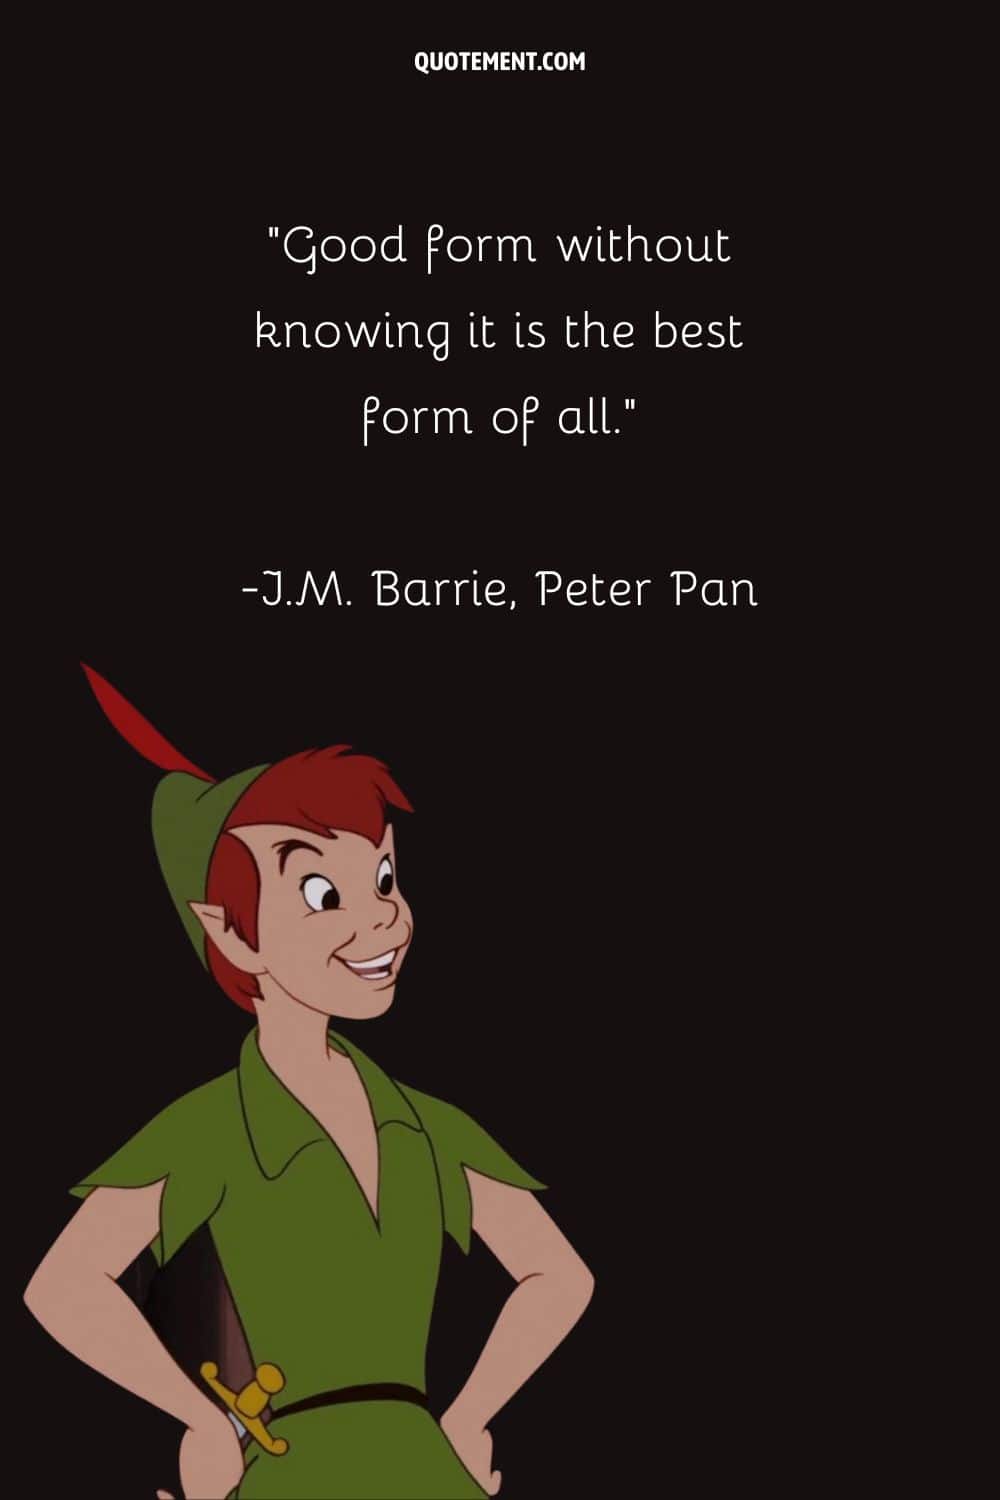 “Good form without knowing it is the best form of all.” ― J.M. Barrie, Peter Pan